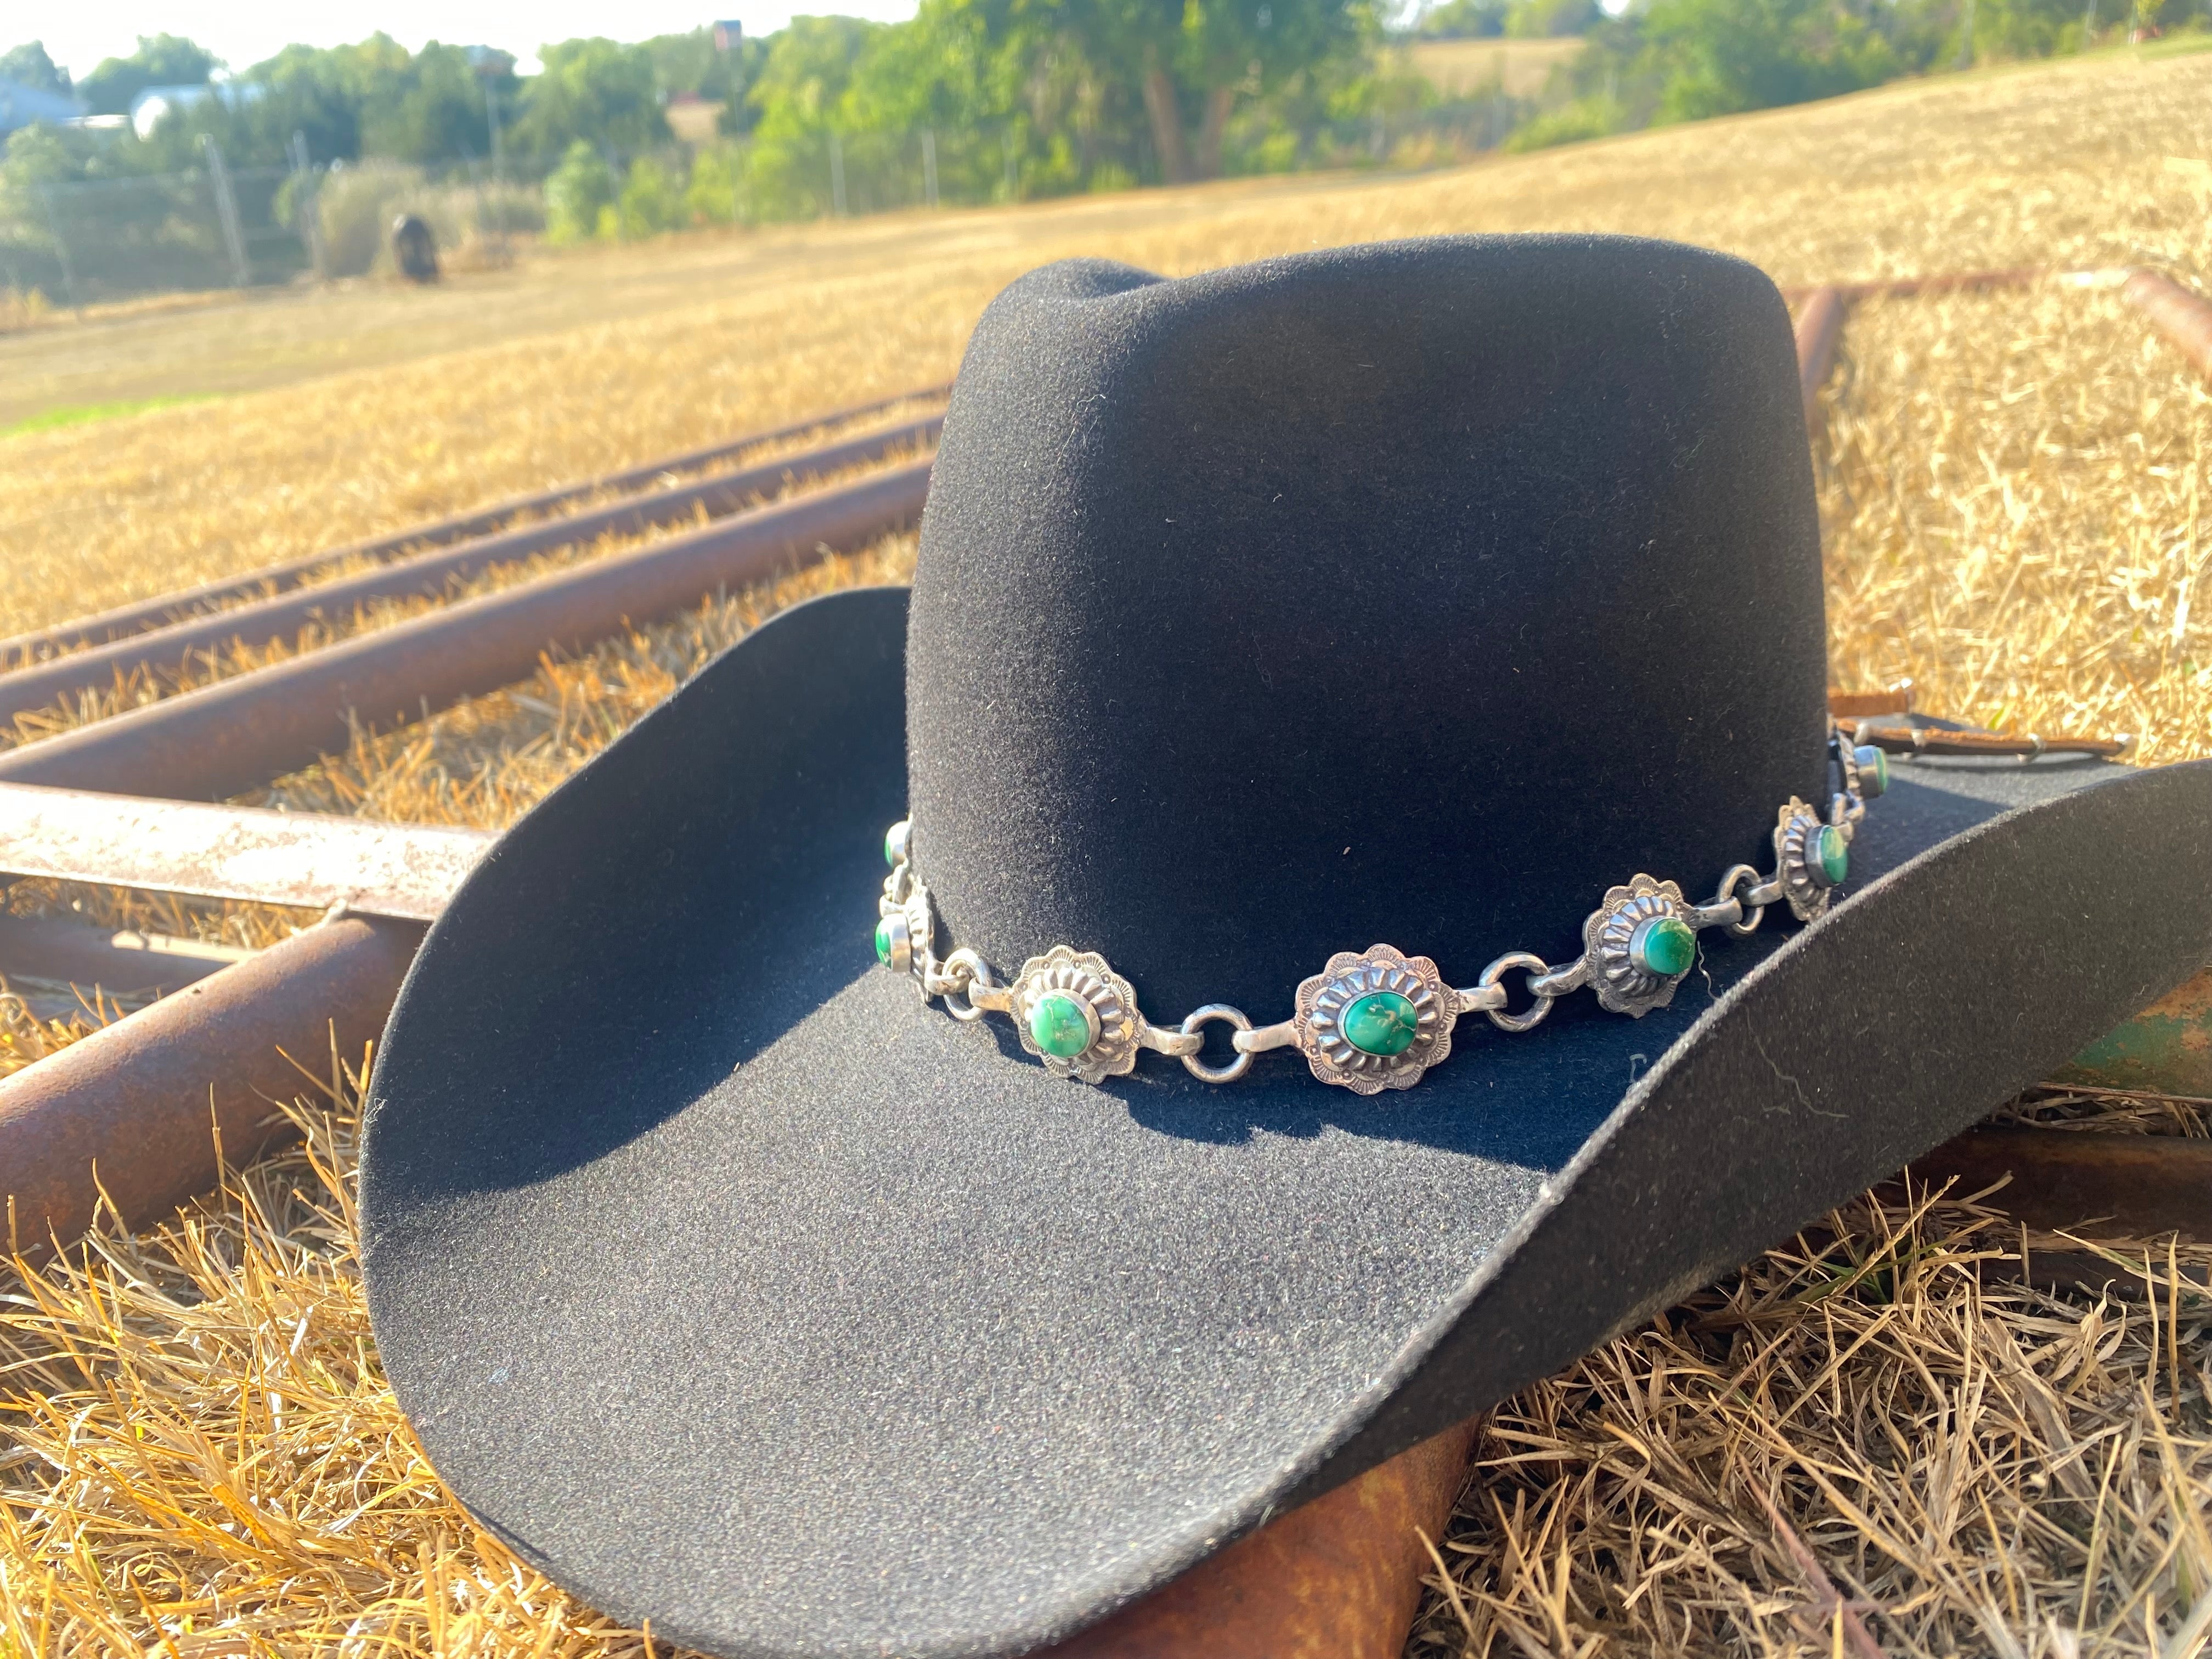 Turquoise Western Hat Band  Rectangular Conchos #2 - The Hattery